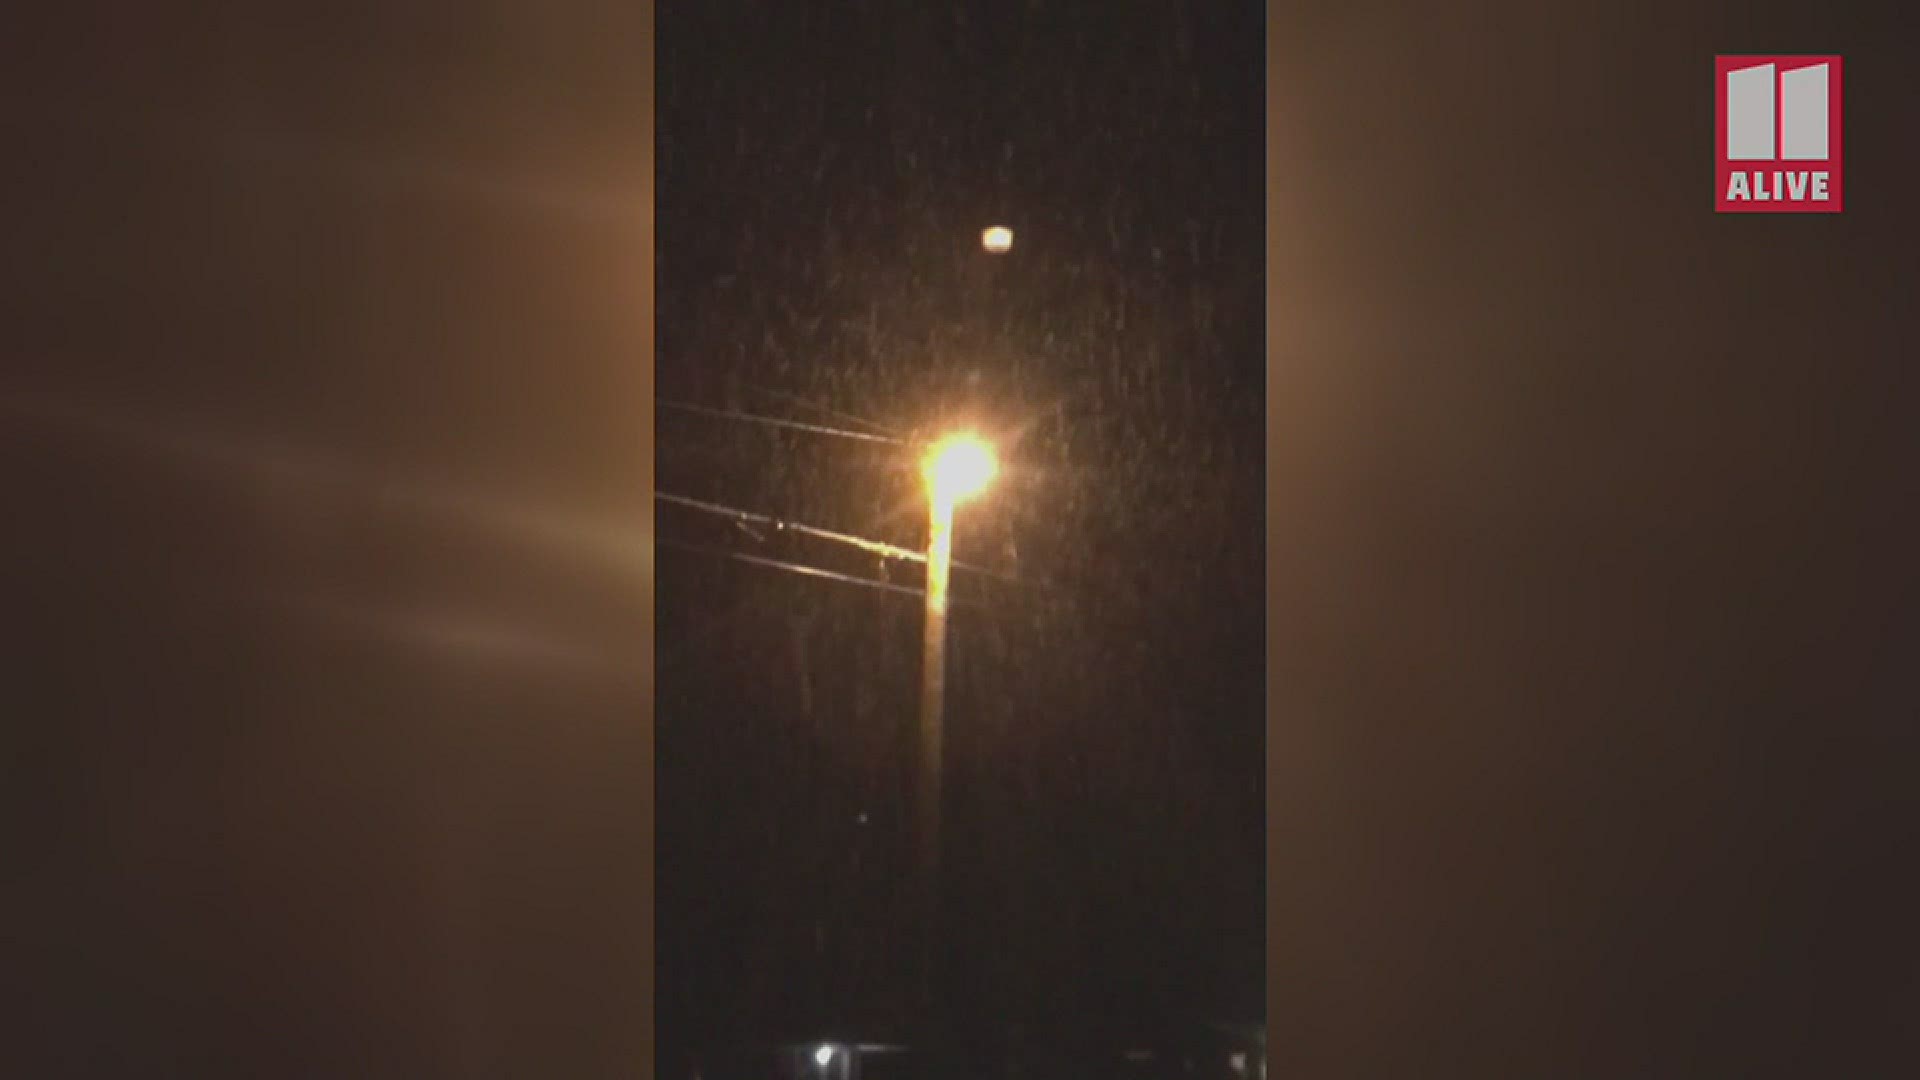 Nikki Smith shared this video of snow falling by street light from McCaysville, Georgia on Saturday.